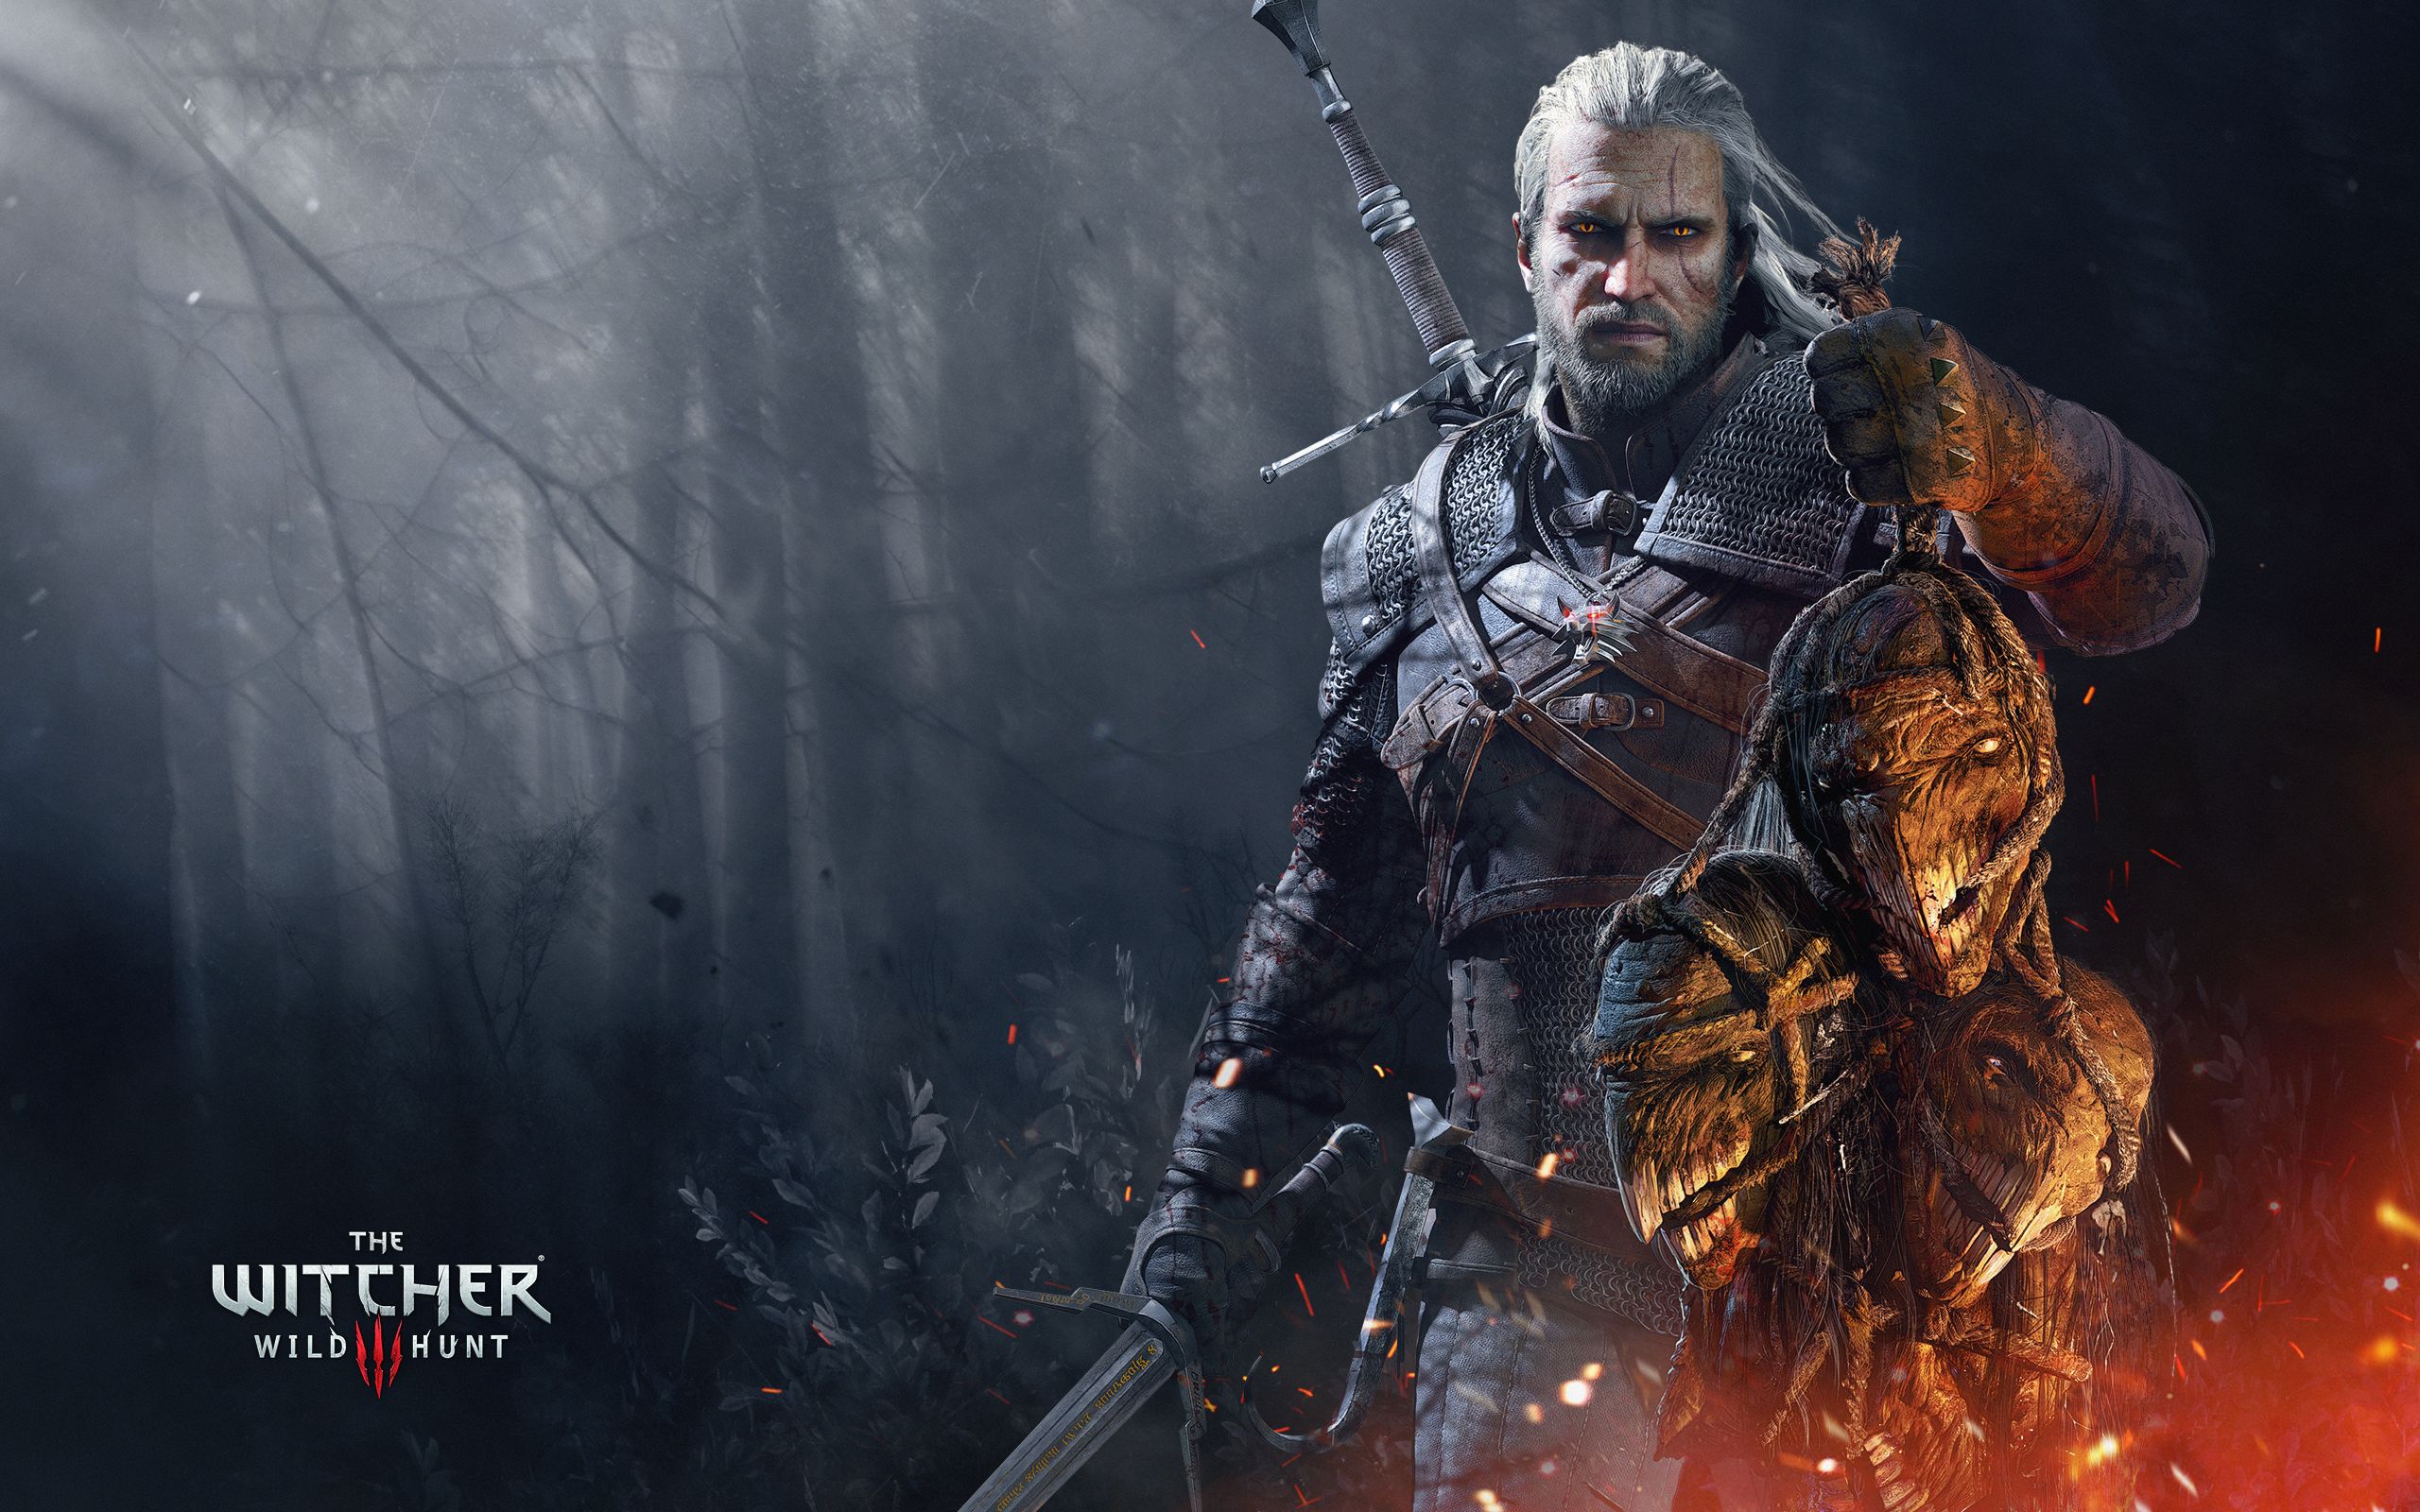 the witcher 3: wild hunt, video game, geralt of rivia, the witcher cell phone wallpapers